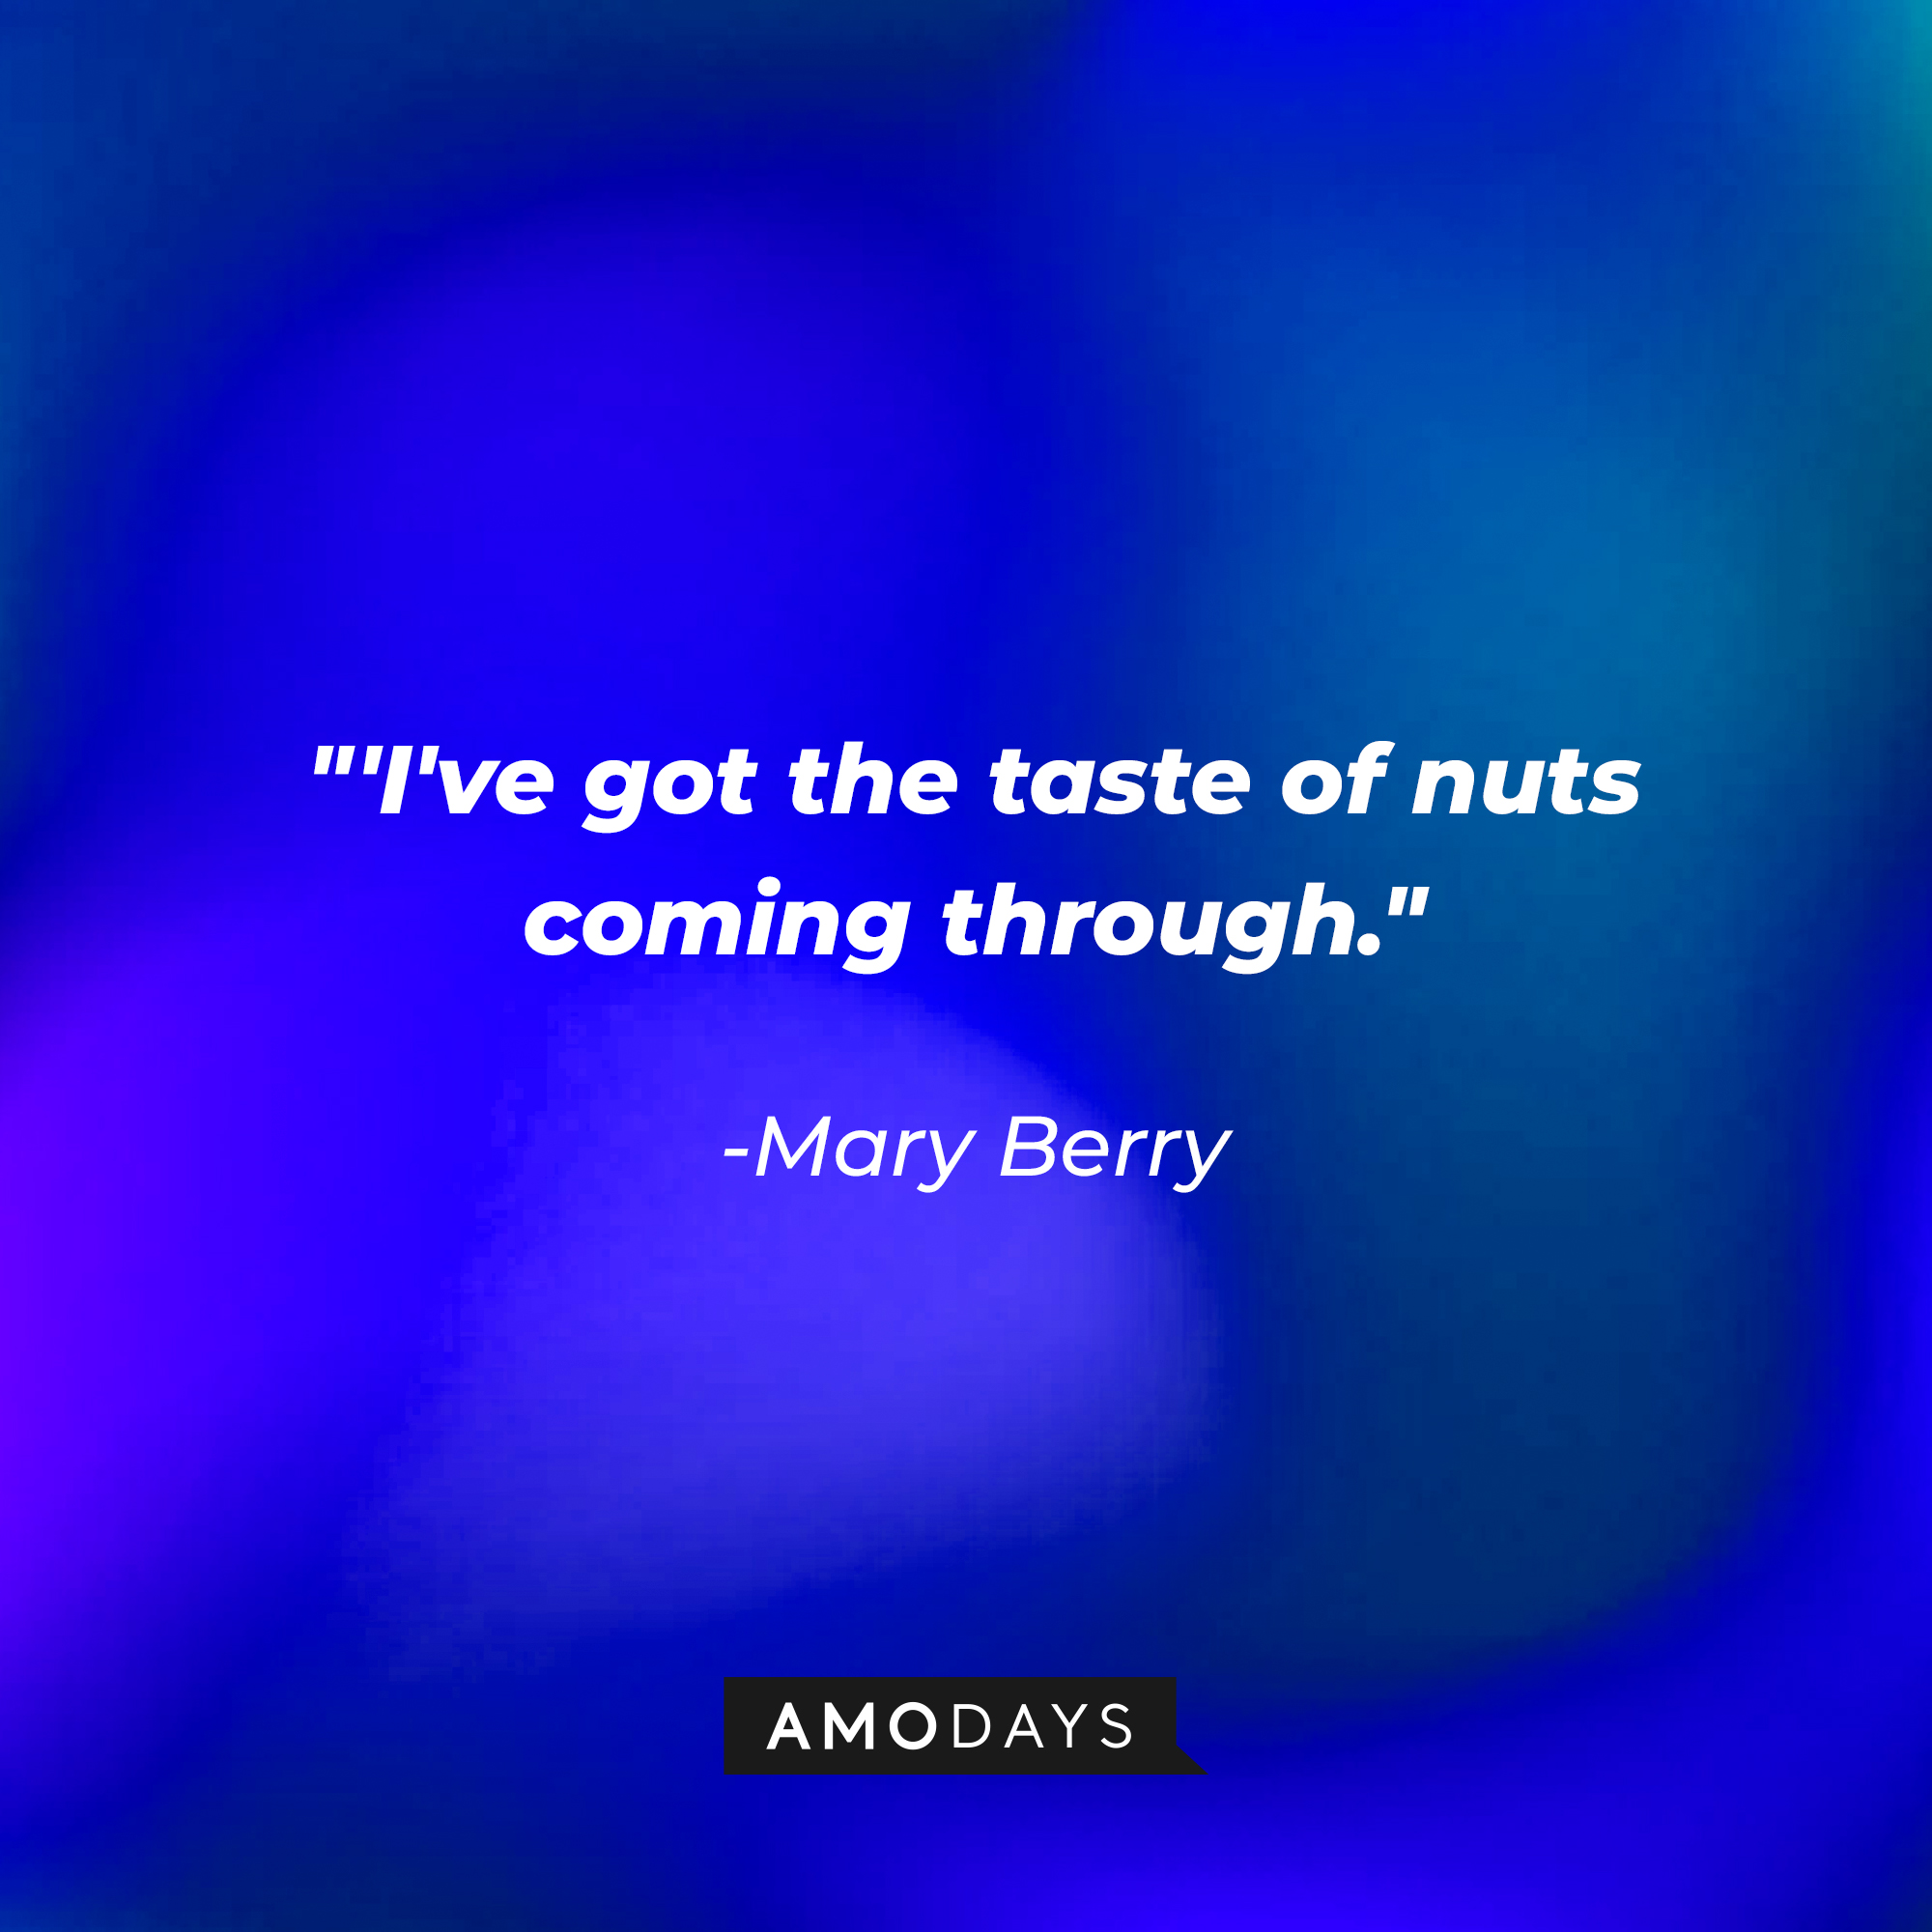 Mary Berry's quote: "I've got the taste of nuts coming through." | Source: AmoDays